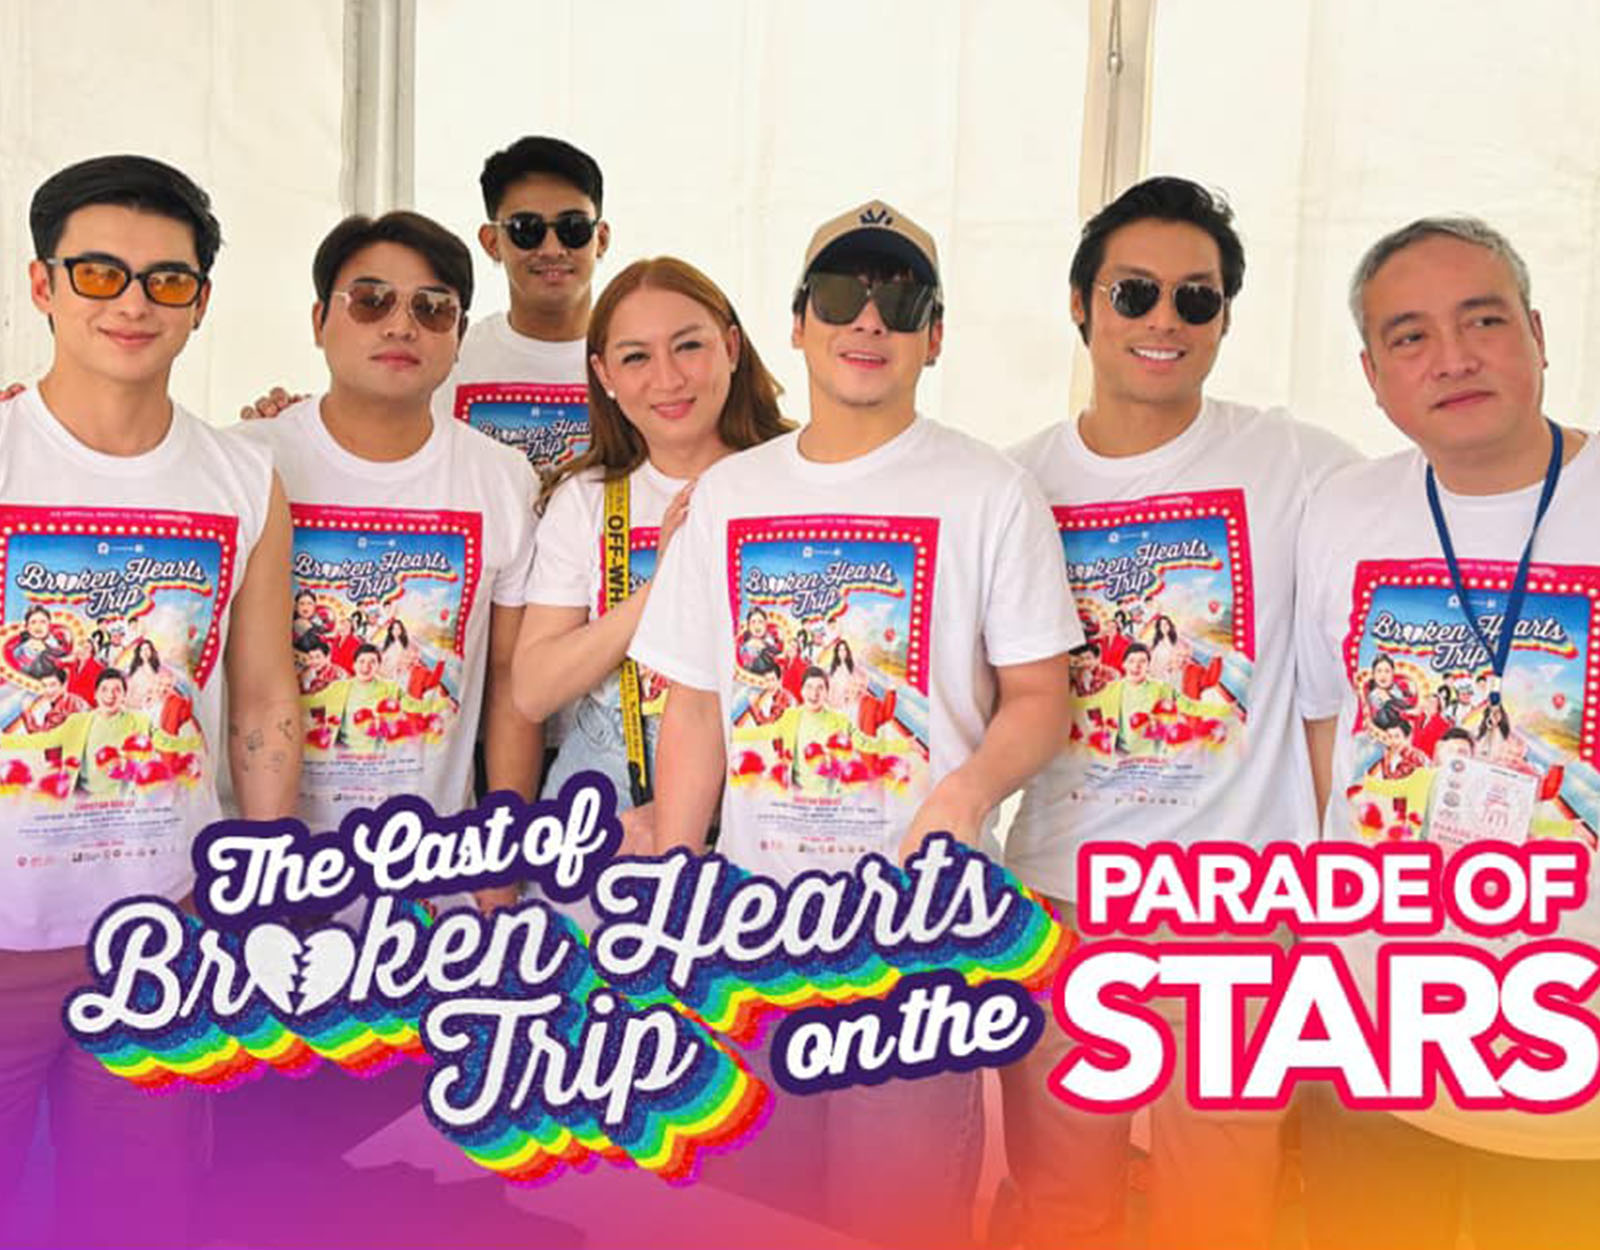 Christian Bables leads the cast of Broken Hearts Trip. Source: Metro Manila Film Festival (MMFF) Official